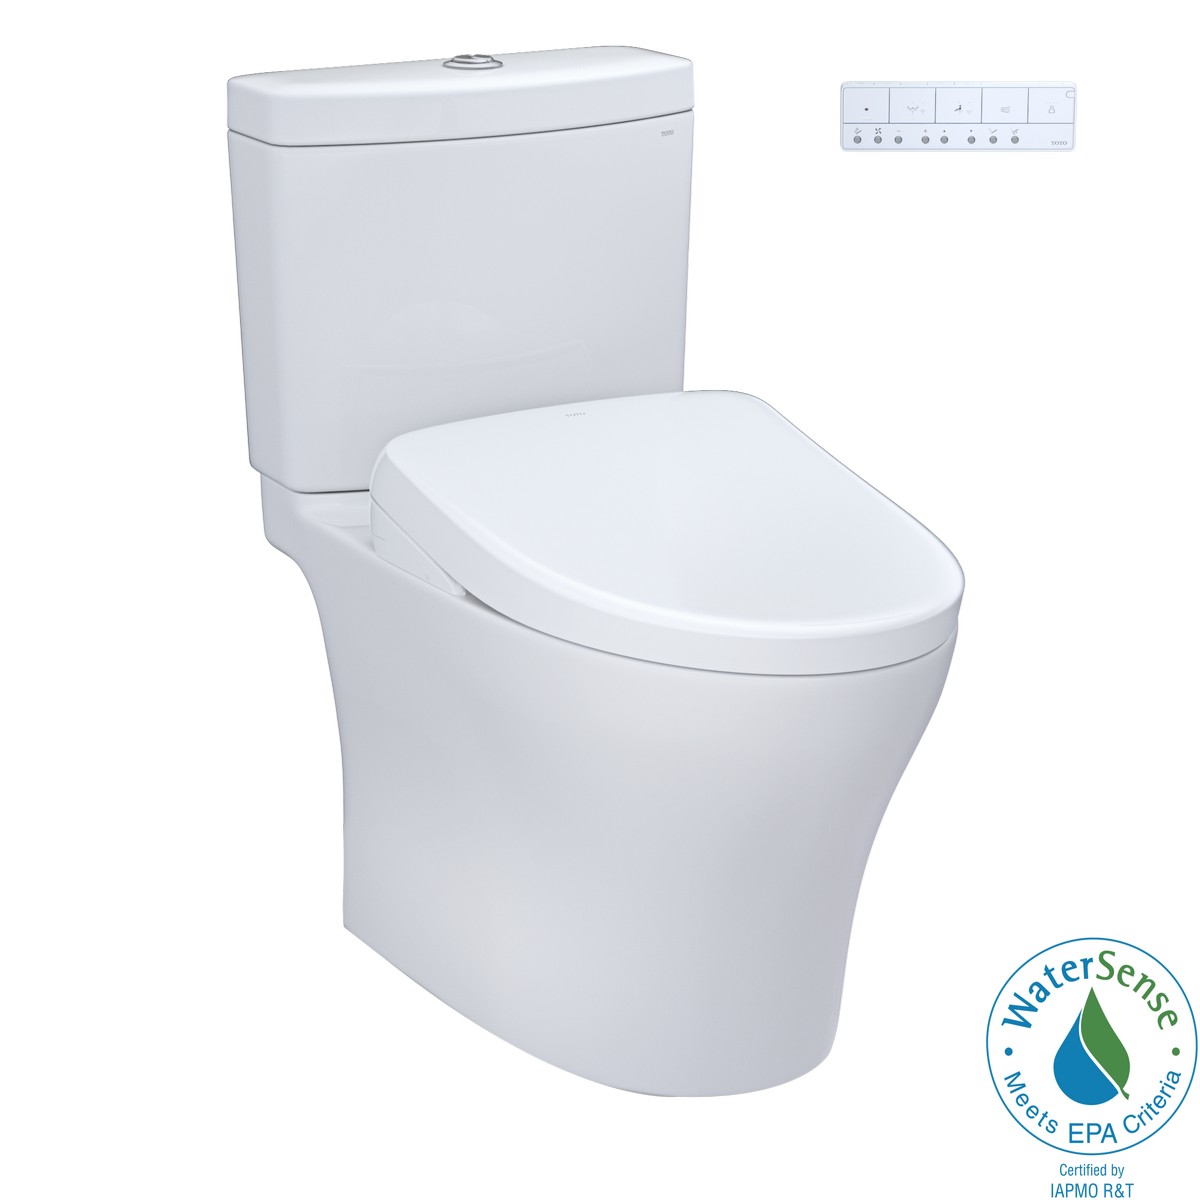 TOTO MW4464726CEMFG#01 WASHLET+ AQUIA IV 1.28 AND 0.9 GPF TWO PIECE DUAL FLUSH ELONGATED TOILET WITH WASHLET S7 BIDET SEAT IN COTTON WHITE